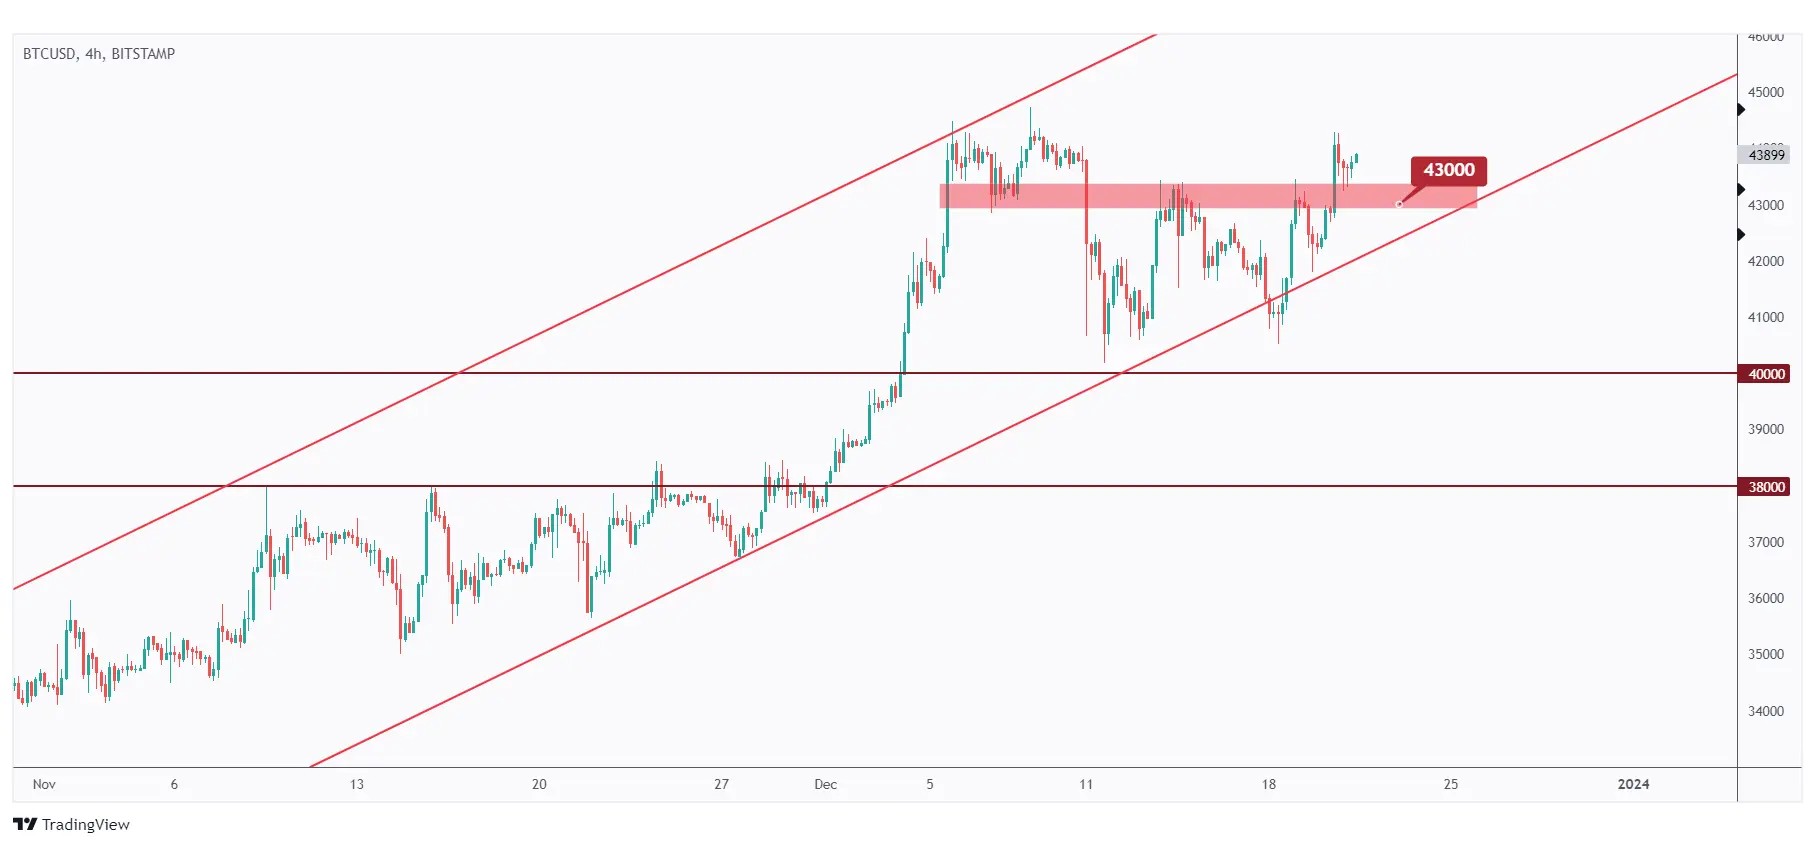 Bitcoin 4H chart showing that the bulls are in control after breaking above the $43,000 level